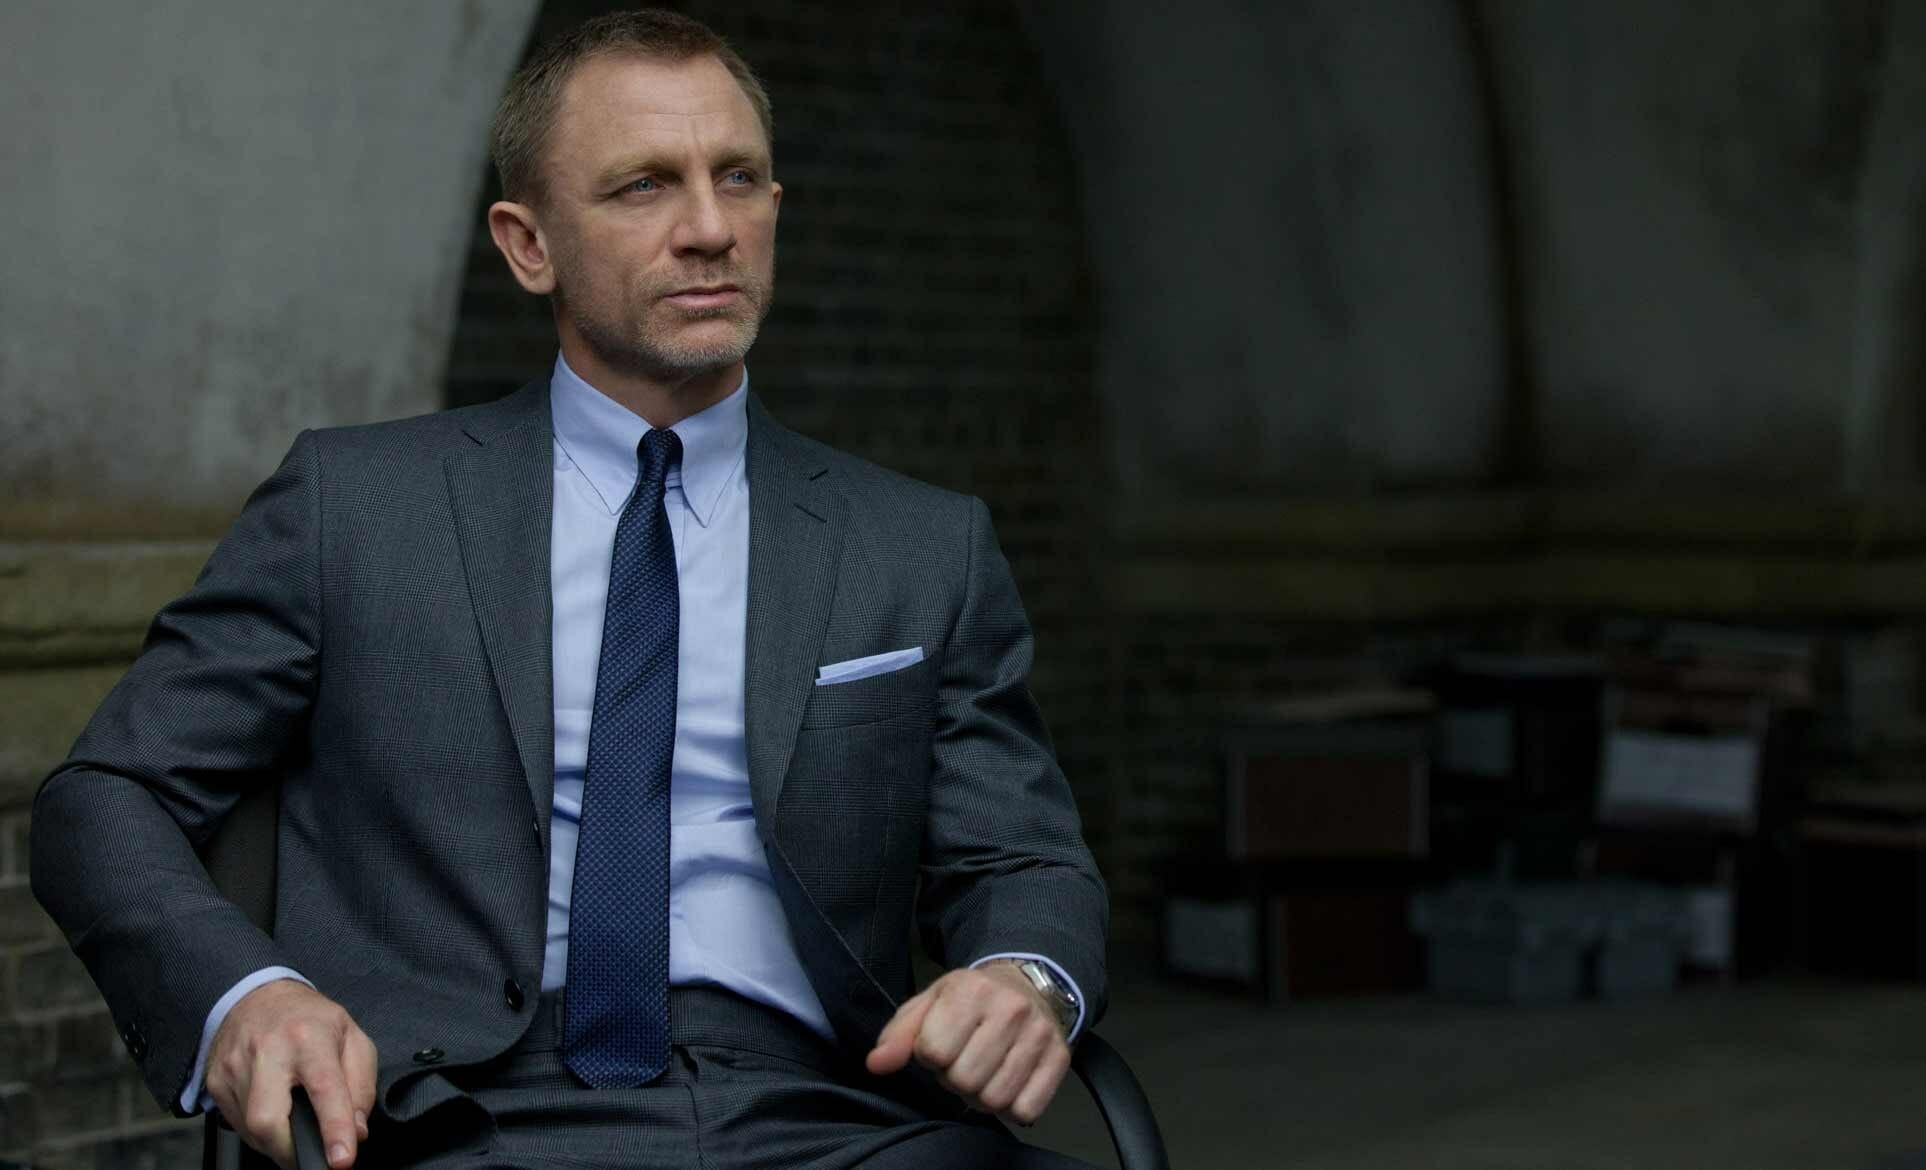 Daniel Craig as James Bond in a mid-gray suit with mid-blue tie.